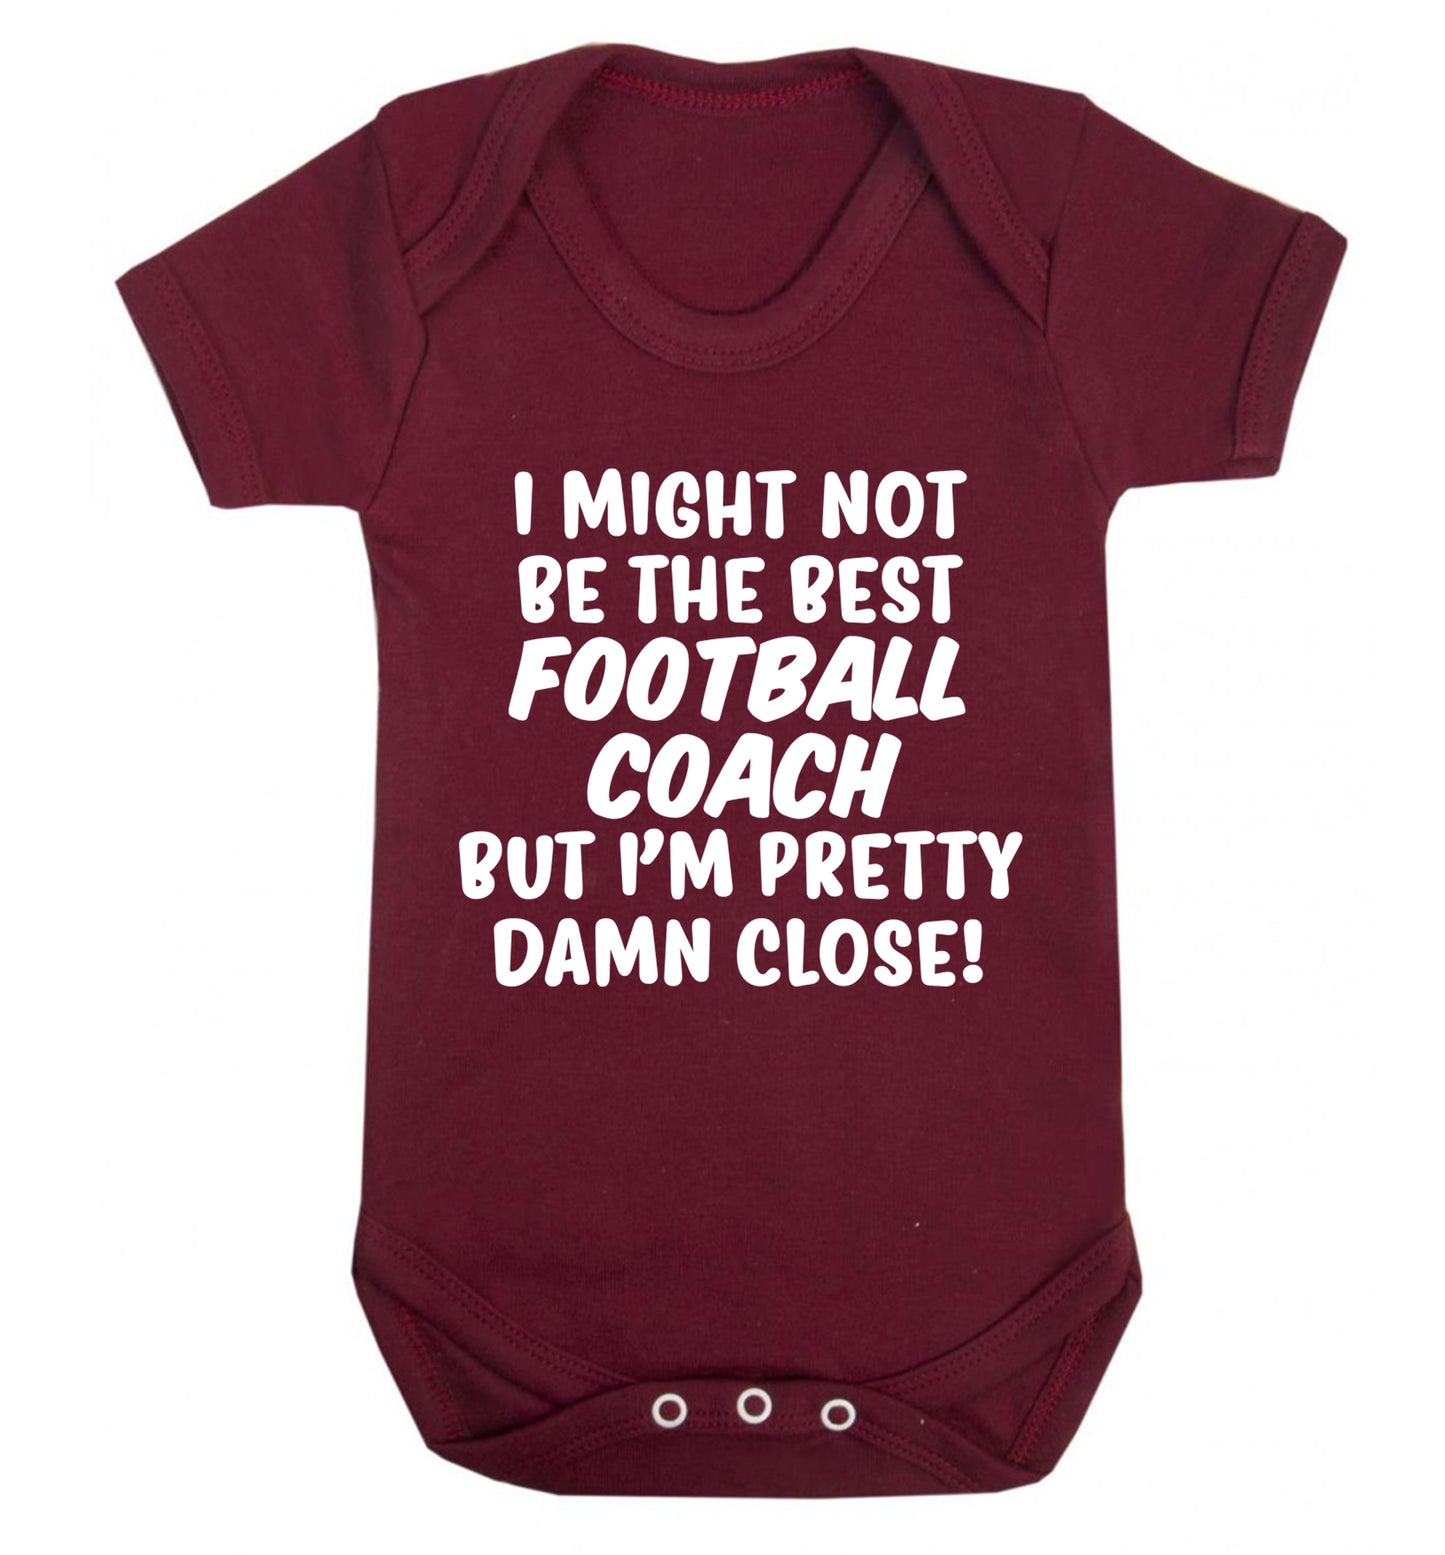 I might not be the best football coach but I'm pretty close! Baby Vest maroon 18-24 months